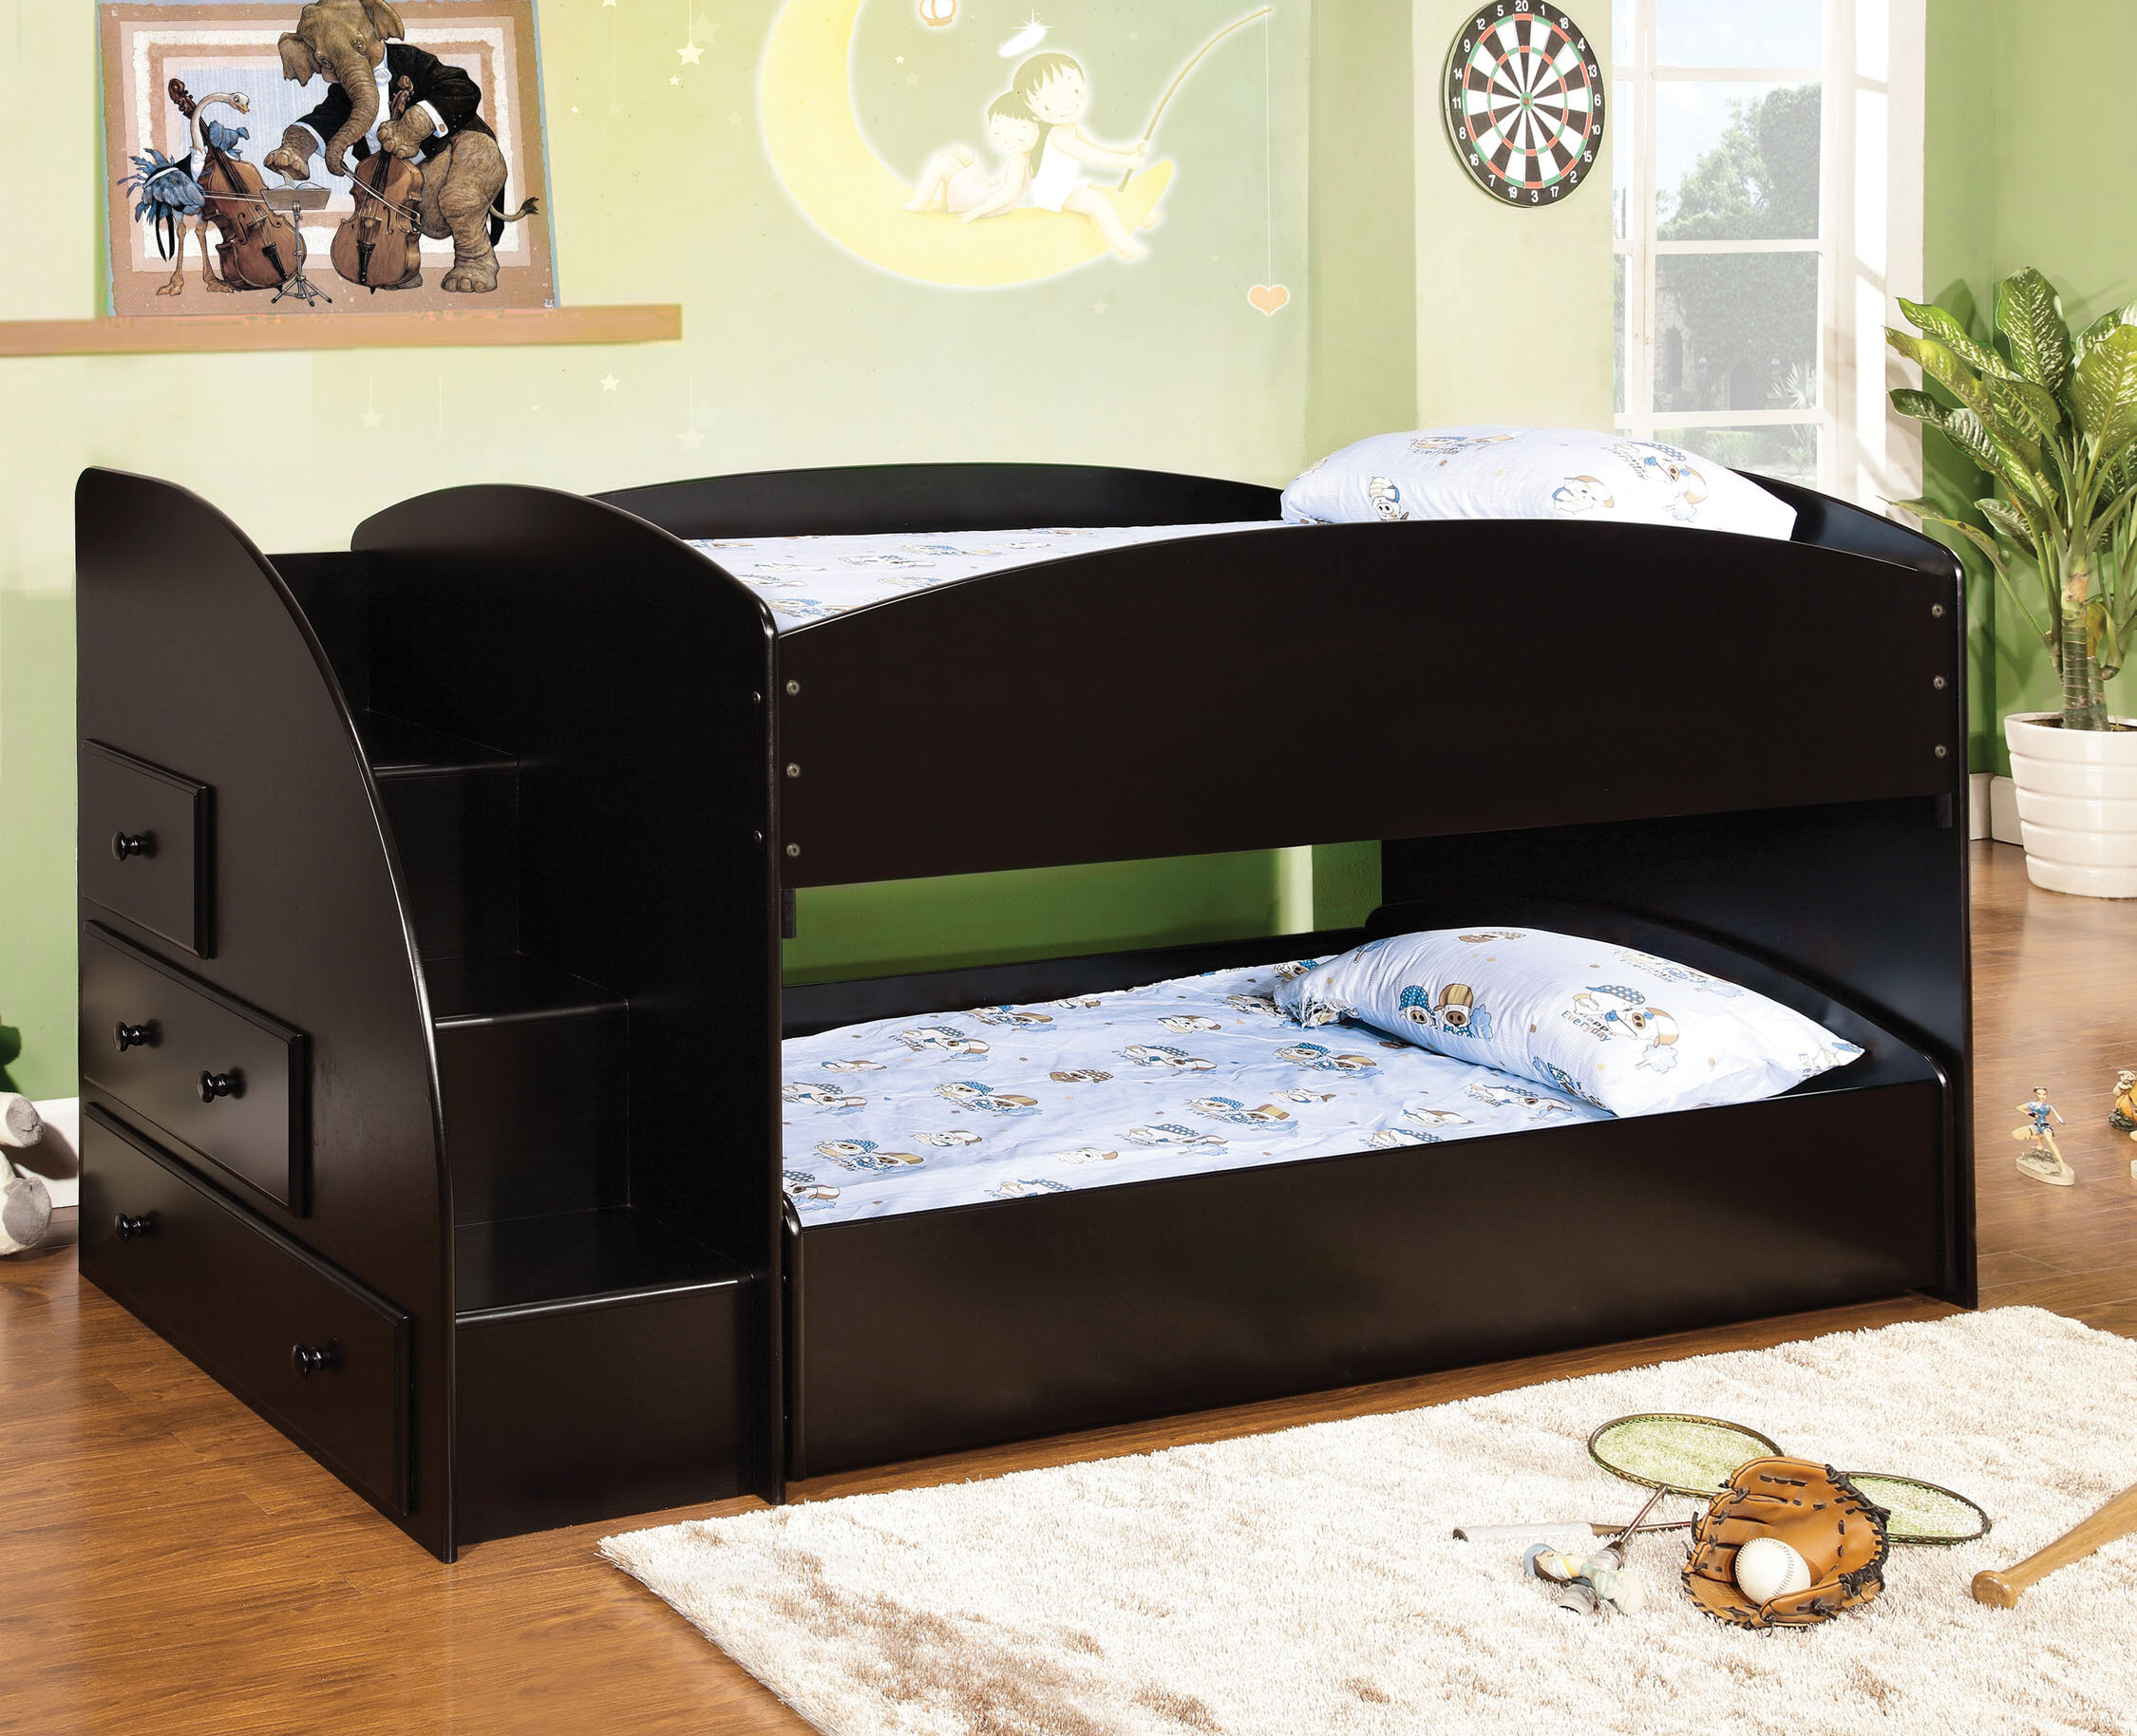 Double twin bunk bed 1